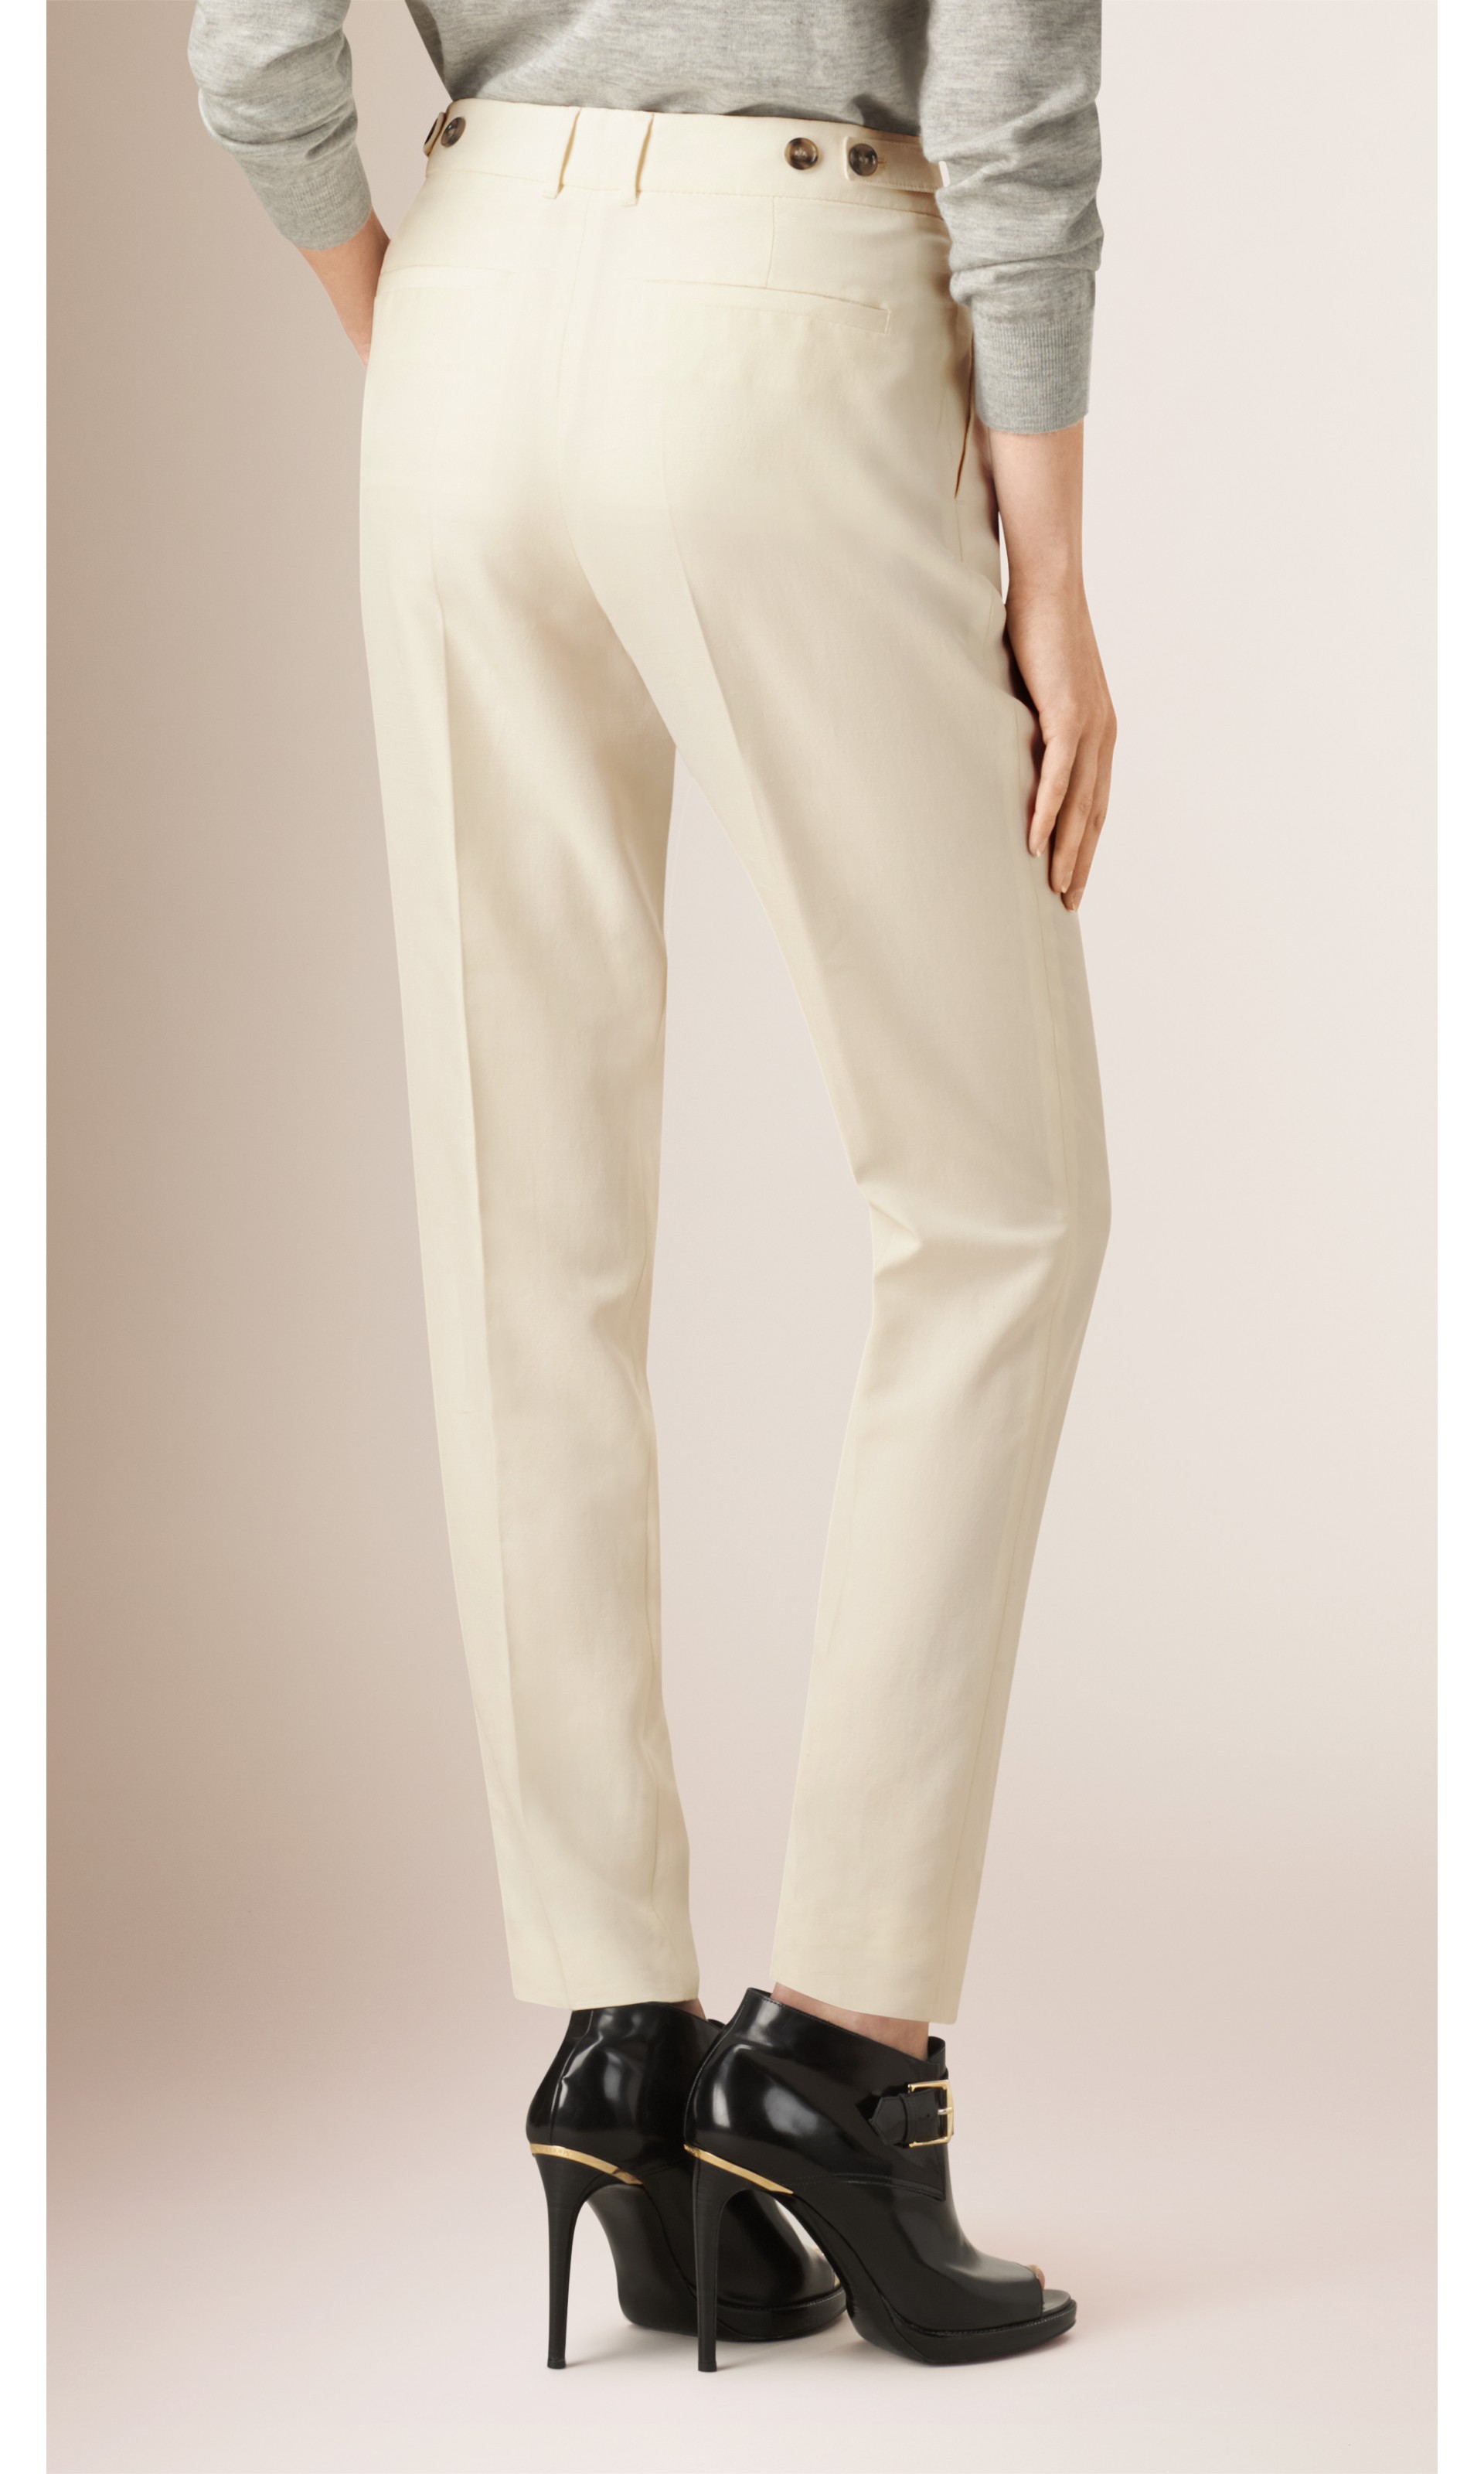 Slim Fit Silk Trousers in Parchment - Women | Burberry United States